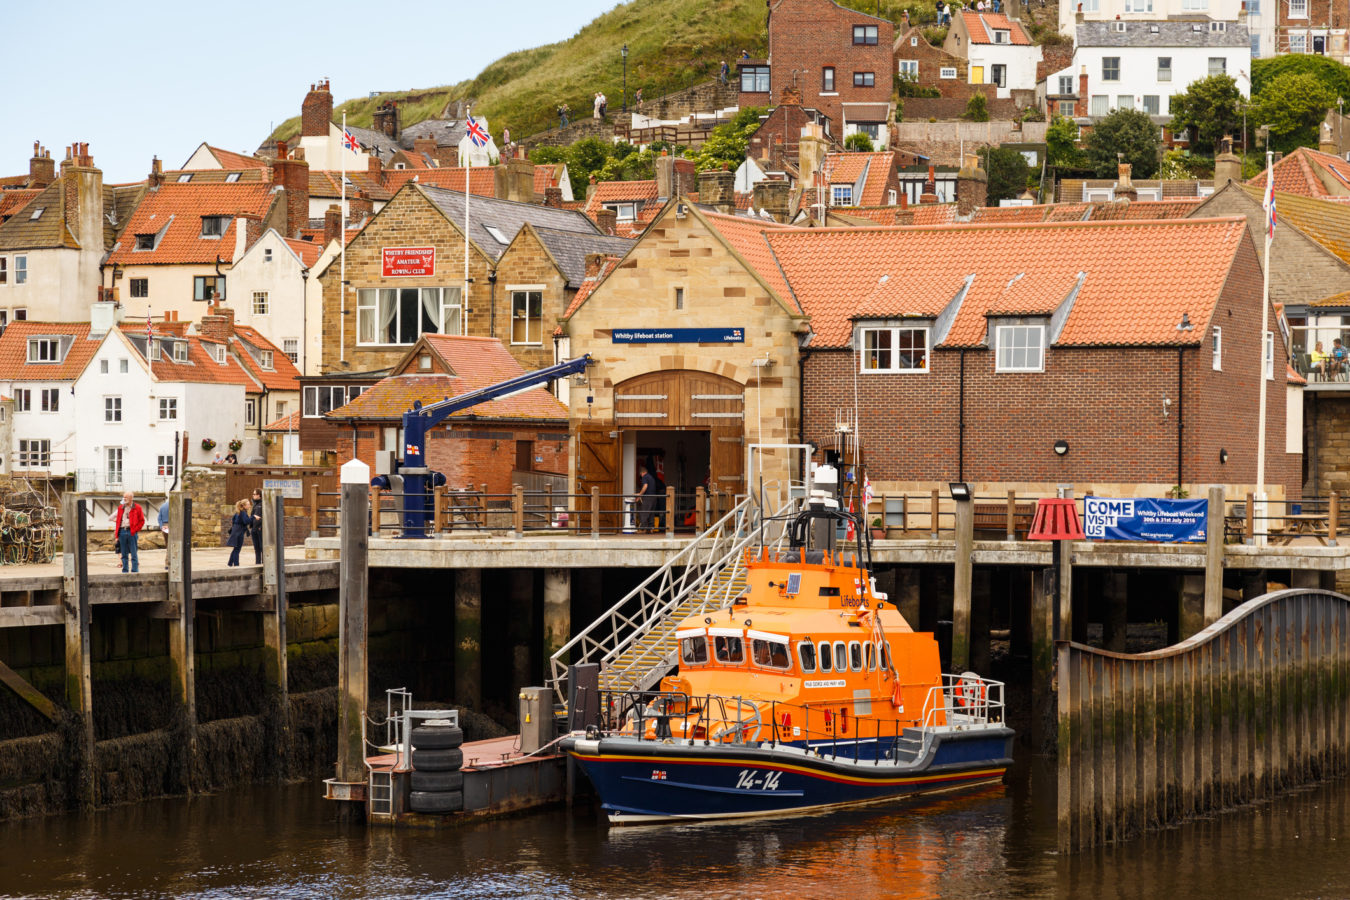 Lifeboat moored at Whitby Lifeboat Station.